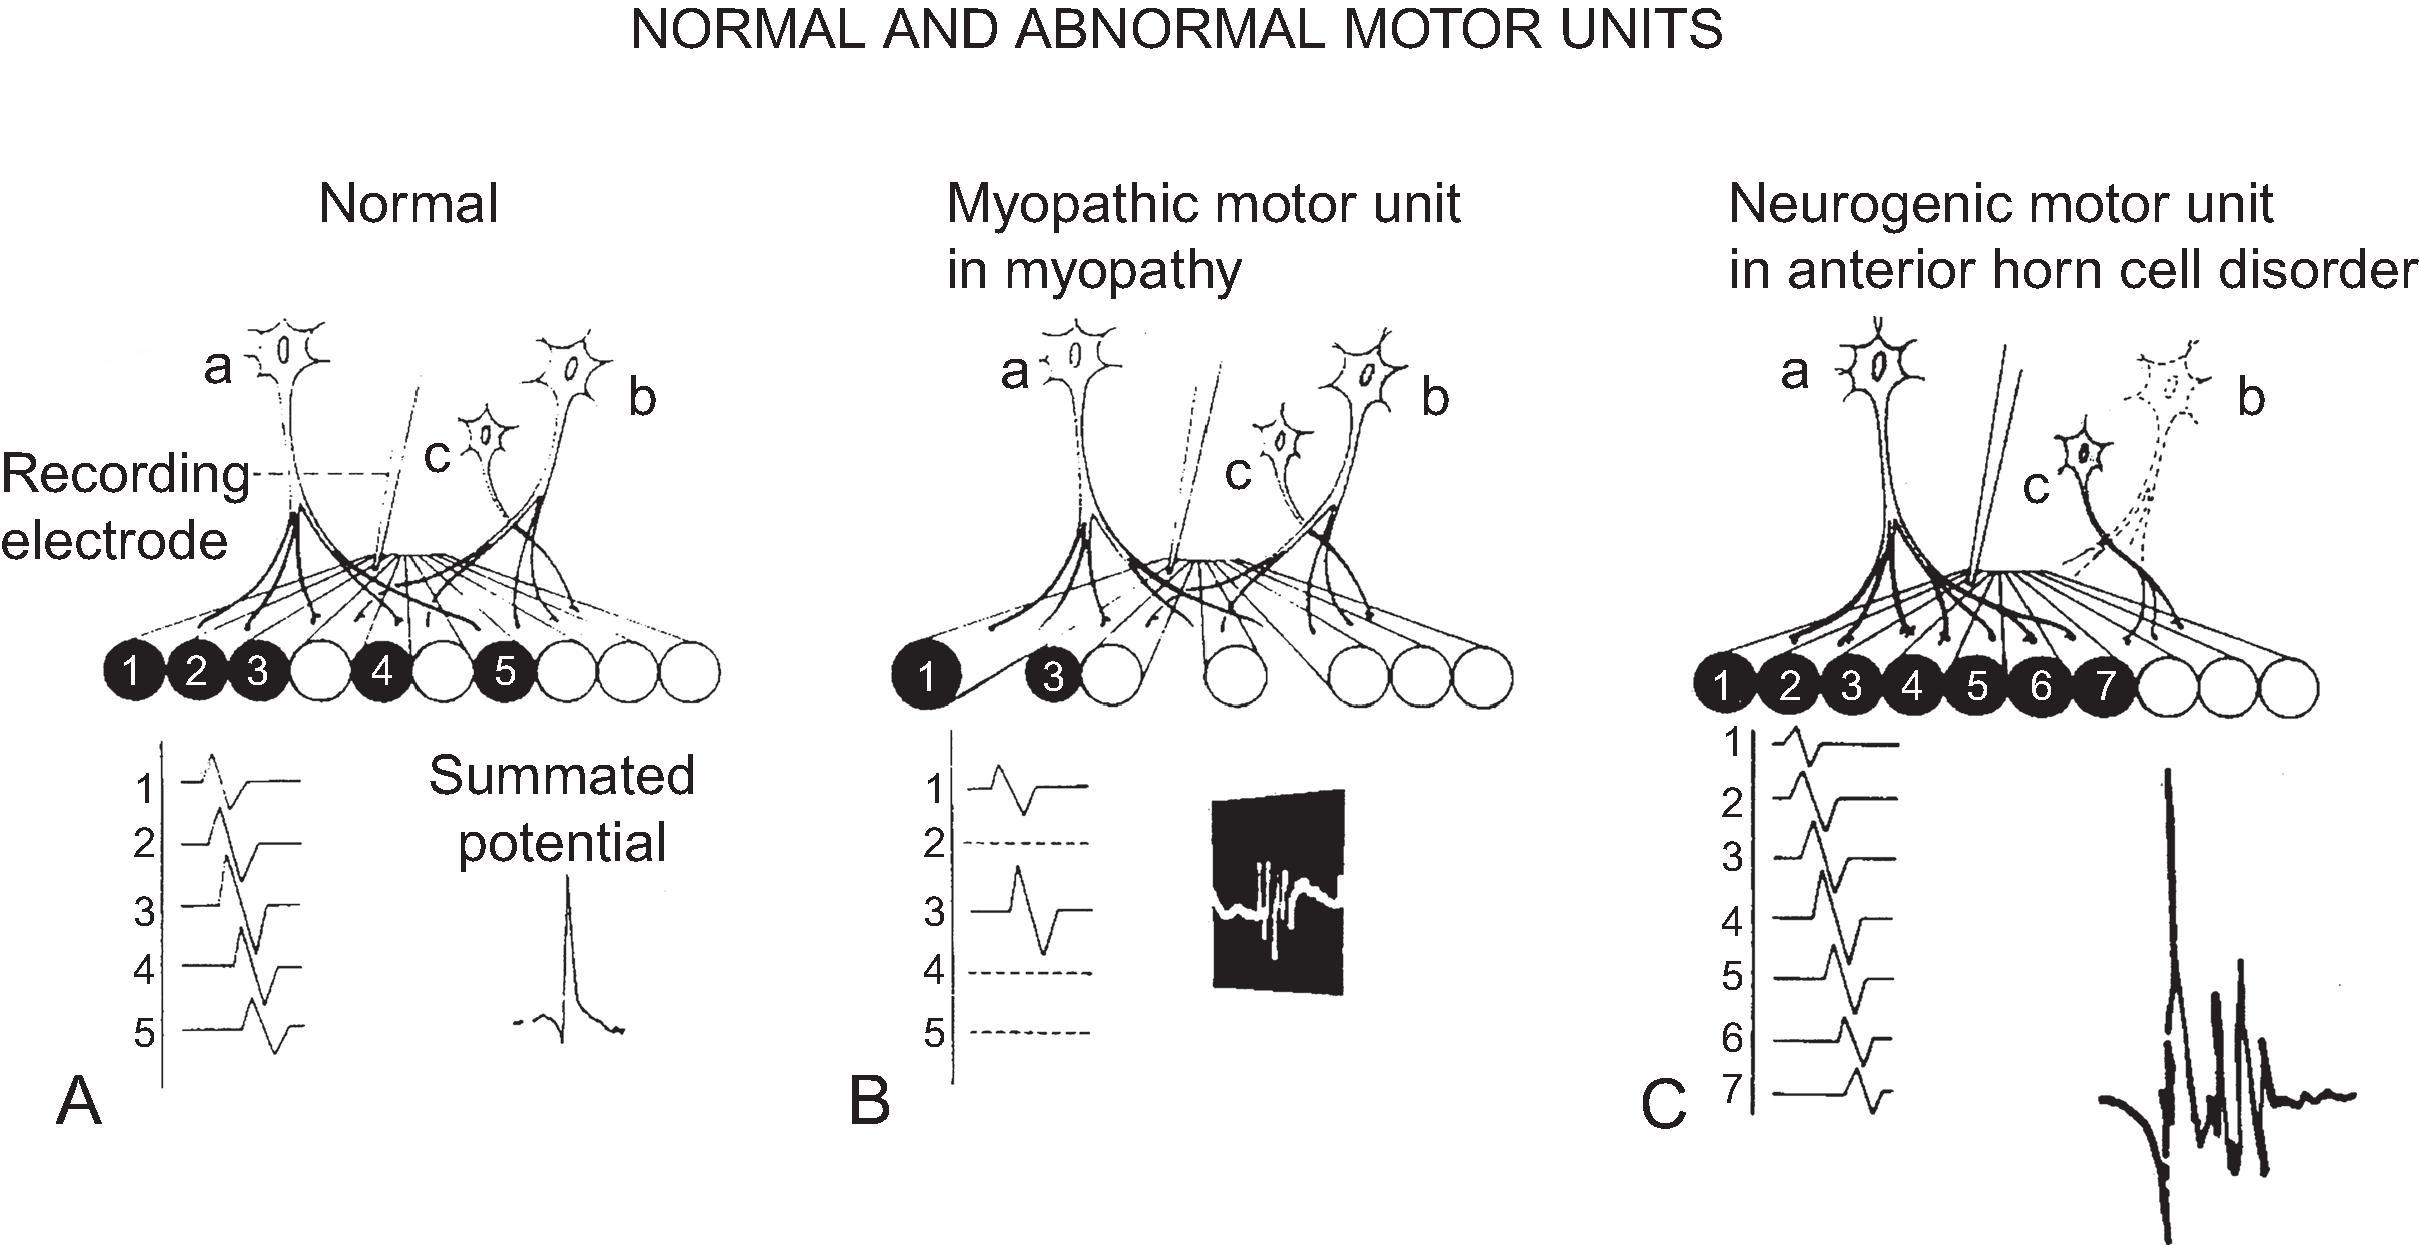 Figure 19.2, A, Schematic illustration of three normal motor units, “a,” “b,” and “c.” Note: Muscle fibers of different motor units are normally intermingled. Below the motor units are action potentials of five individual muscle fibers of a motor unit and its summated motor unit potential. B, Myopathic changes in motor unit “a.” Of the original five muscle fibers, three have undergone degeneration, thus reducing the size of the motor unit. C, Neurogenic transformation of motor unit “a.” Anterior horn cell “b” is shown undergoing degeneration, and its two muscle fibers are not innervated by axons of anterior horn cell “a,” thus leading to an increase in the territory and size of motor unit “a.”